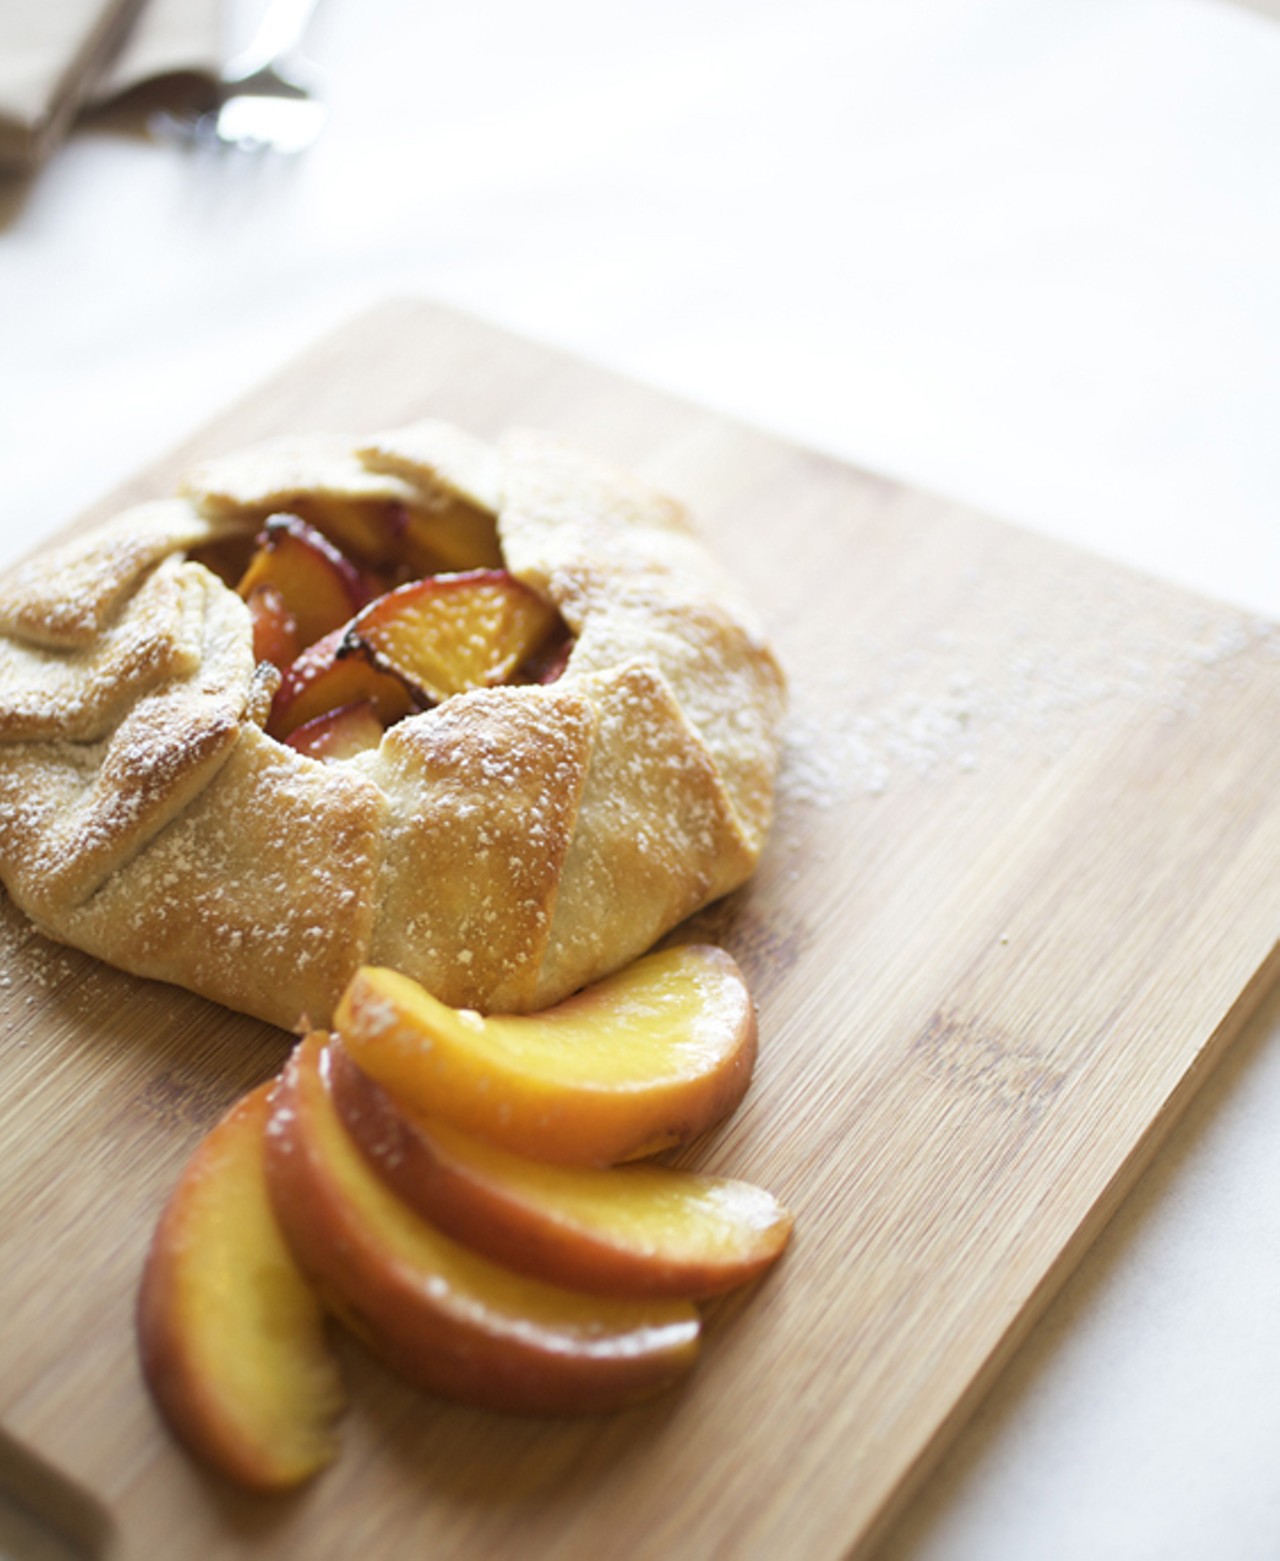 The rustic tart made with local peaches from Nature's Way.